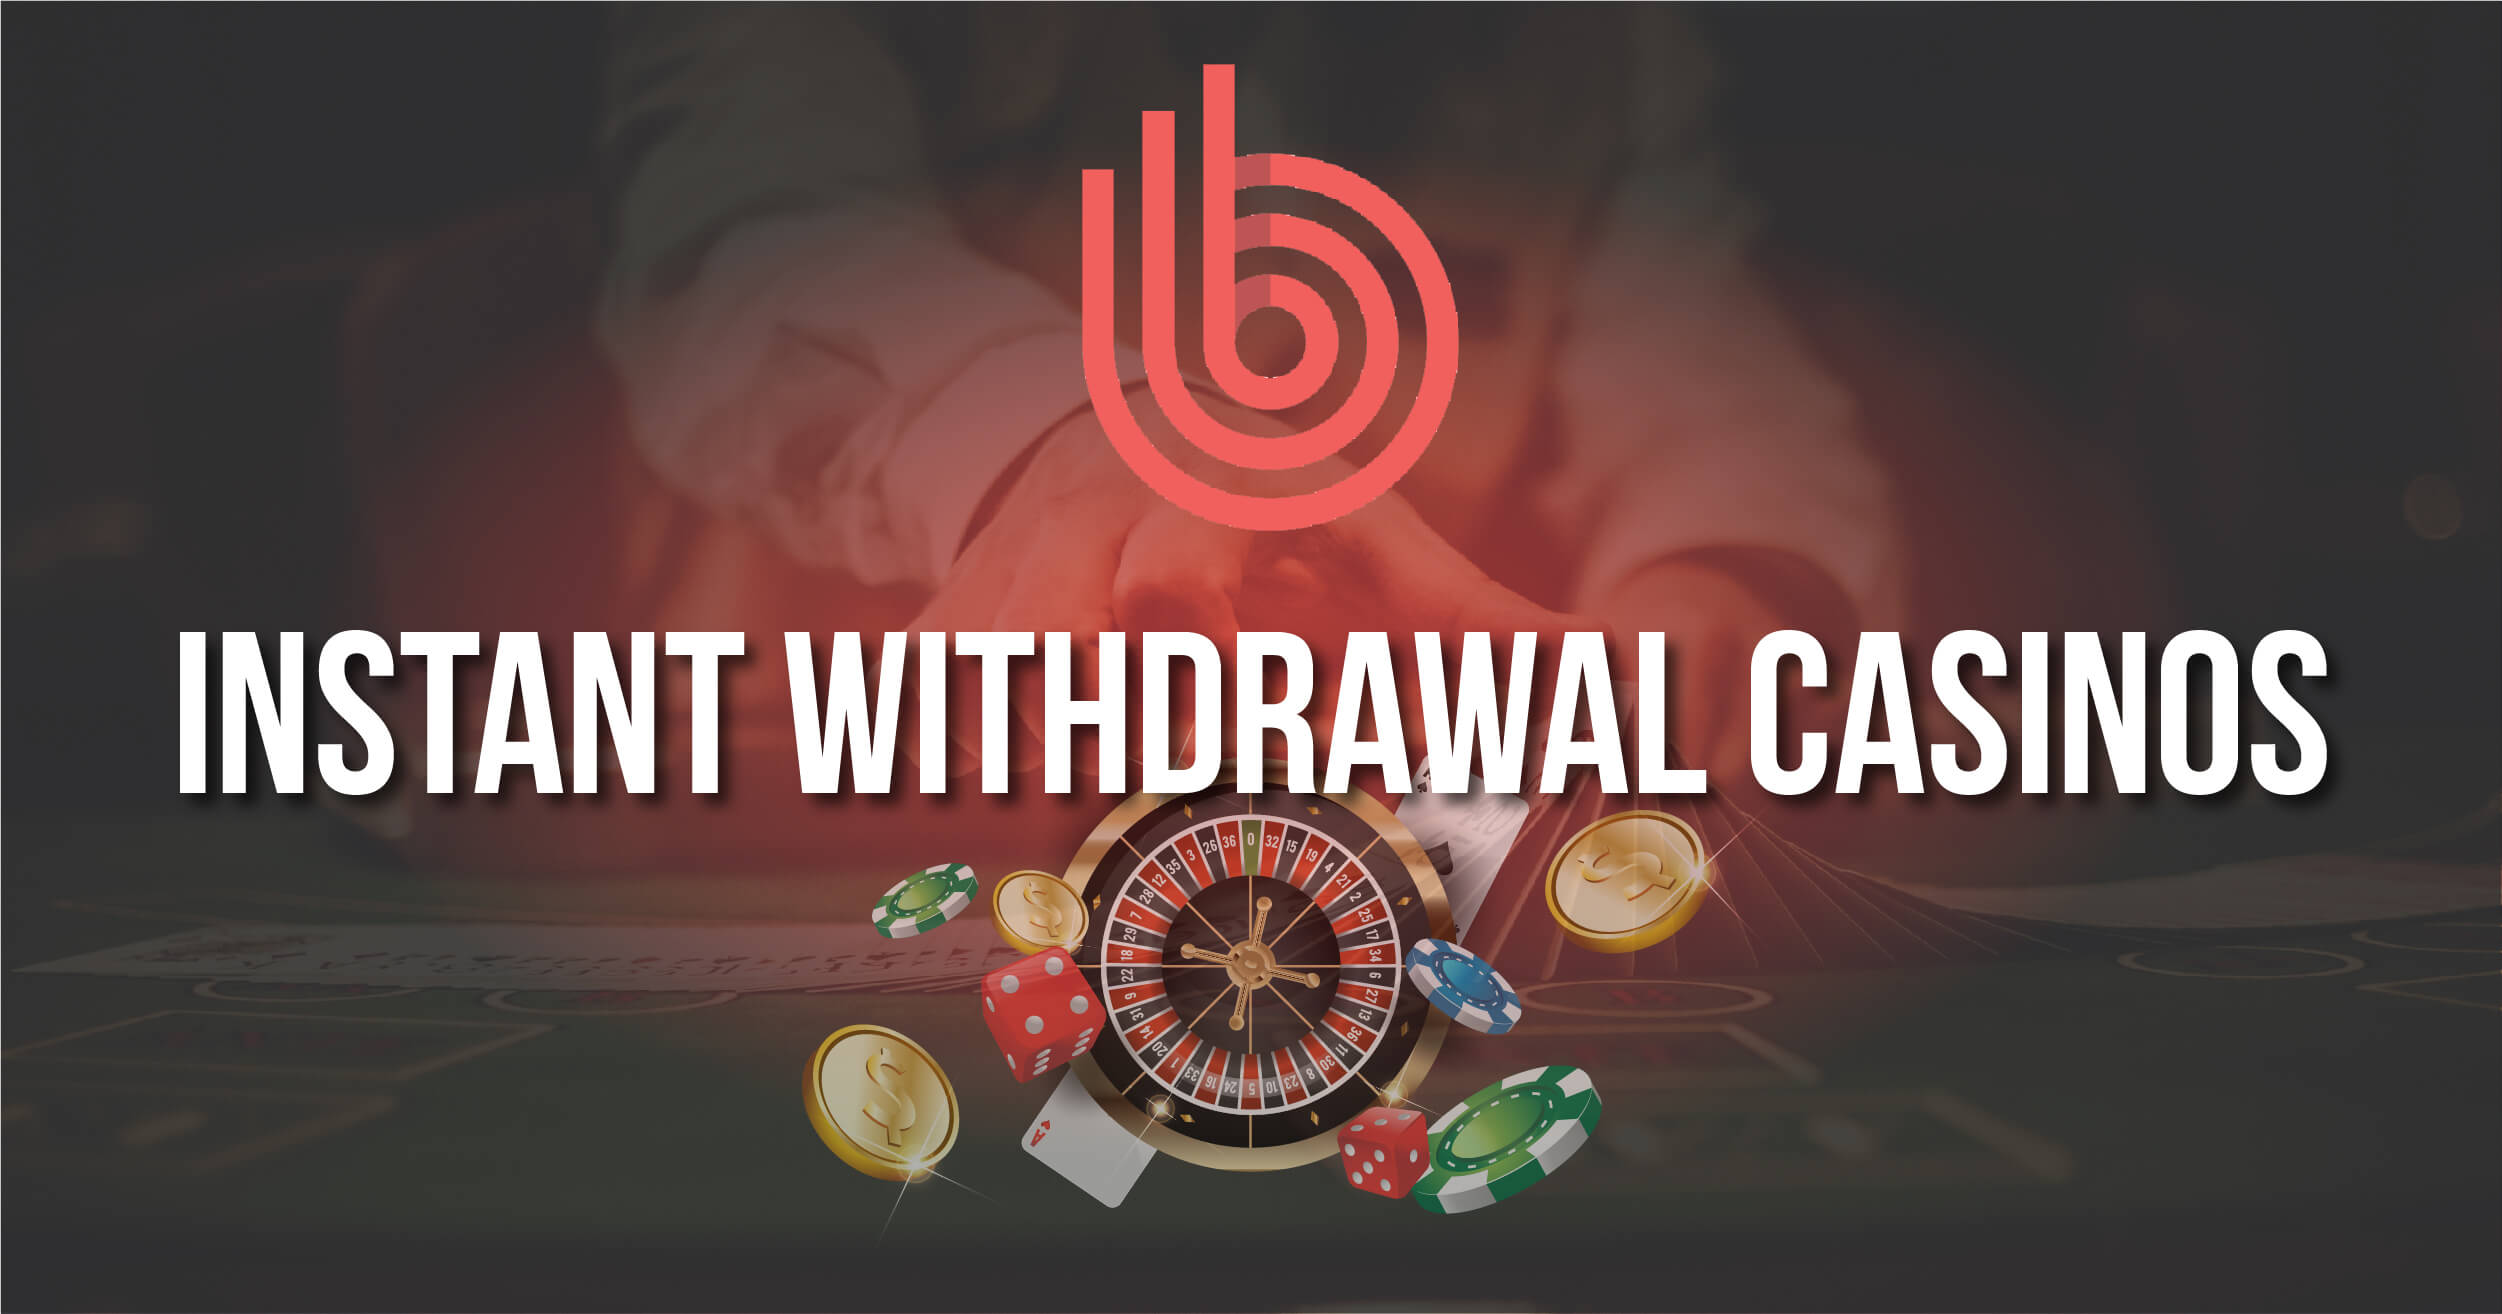 ignition casino request withdrawal bitcoin